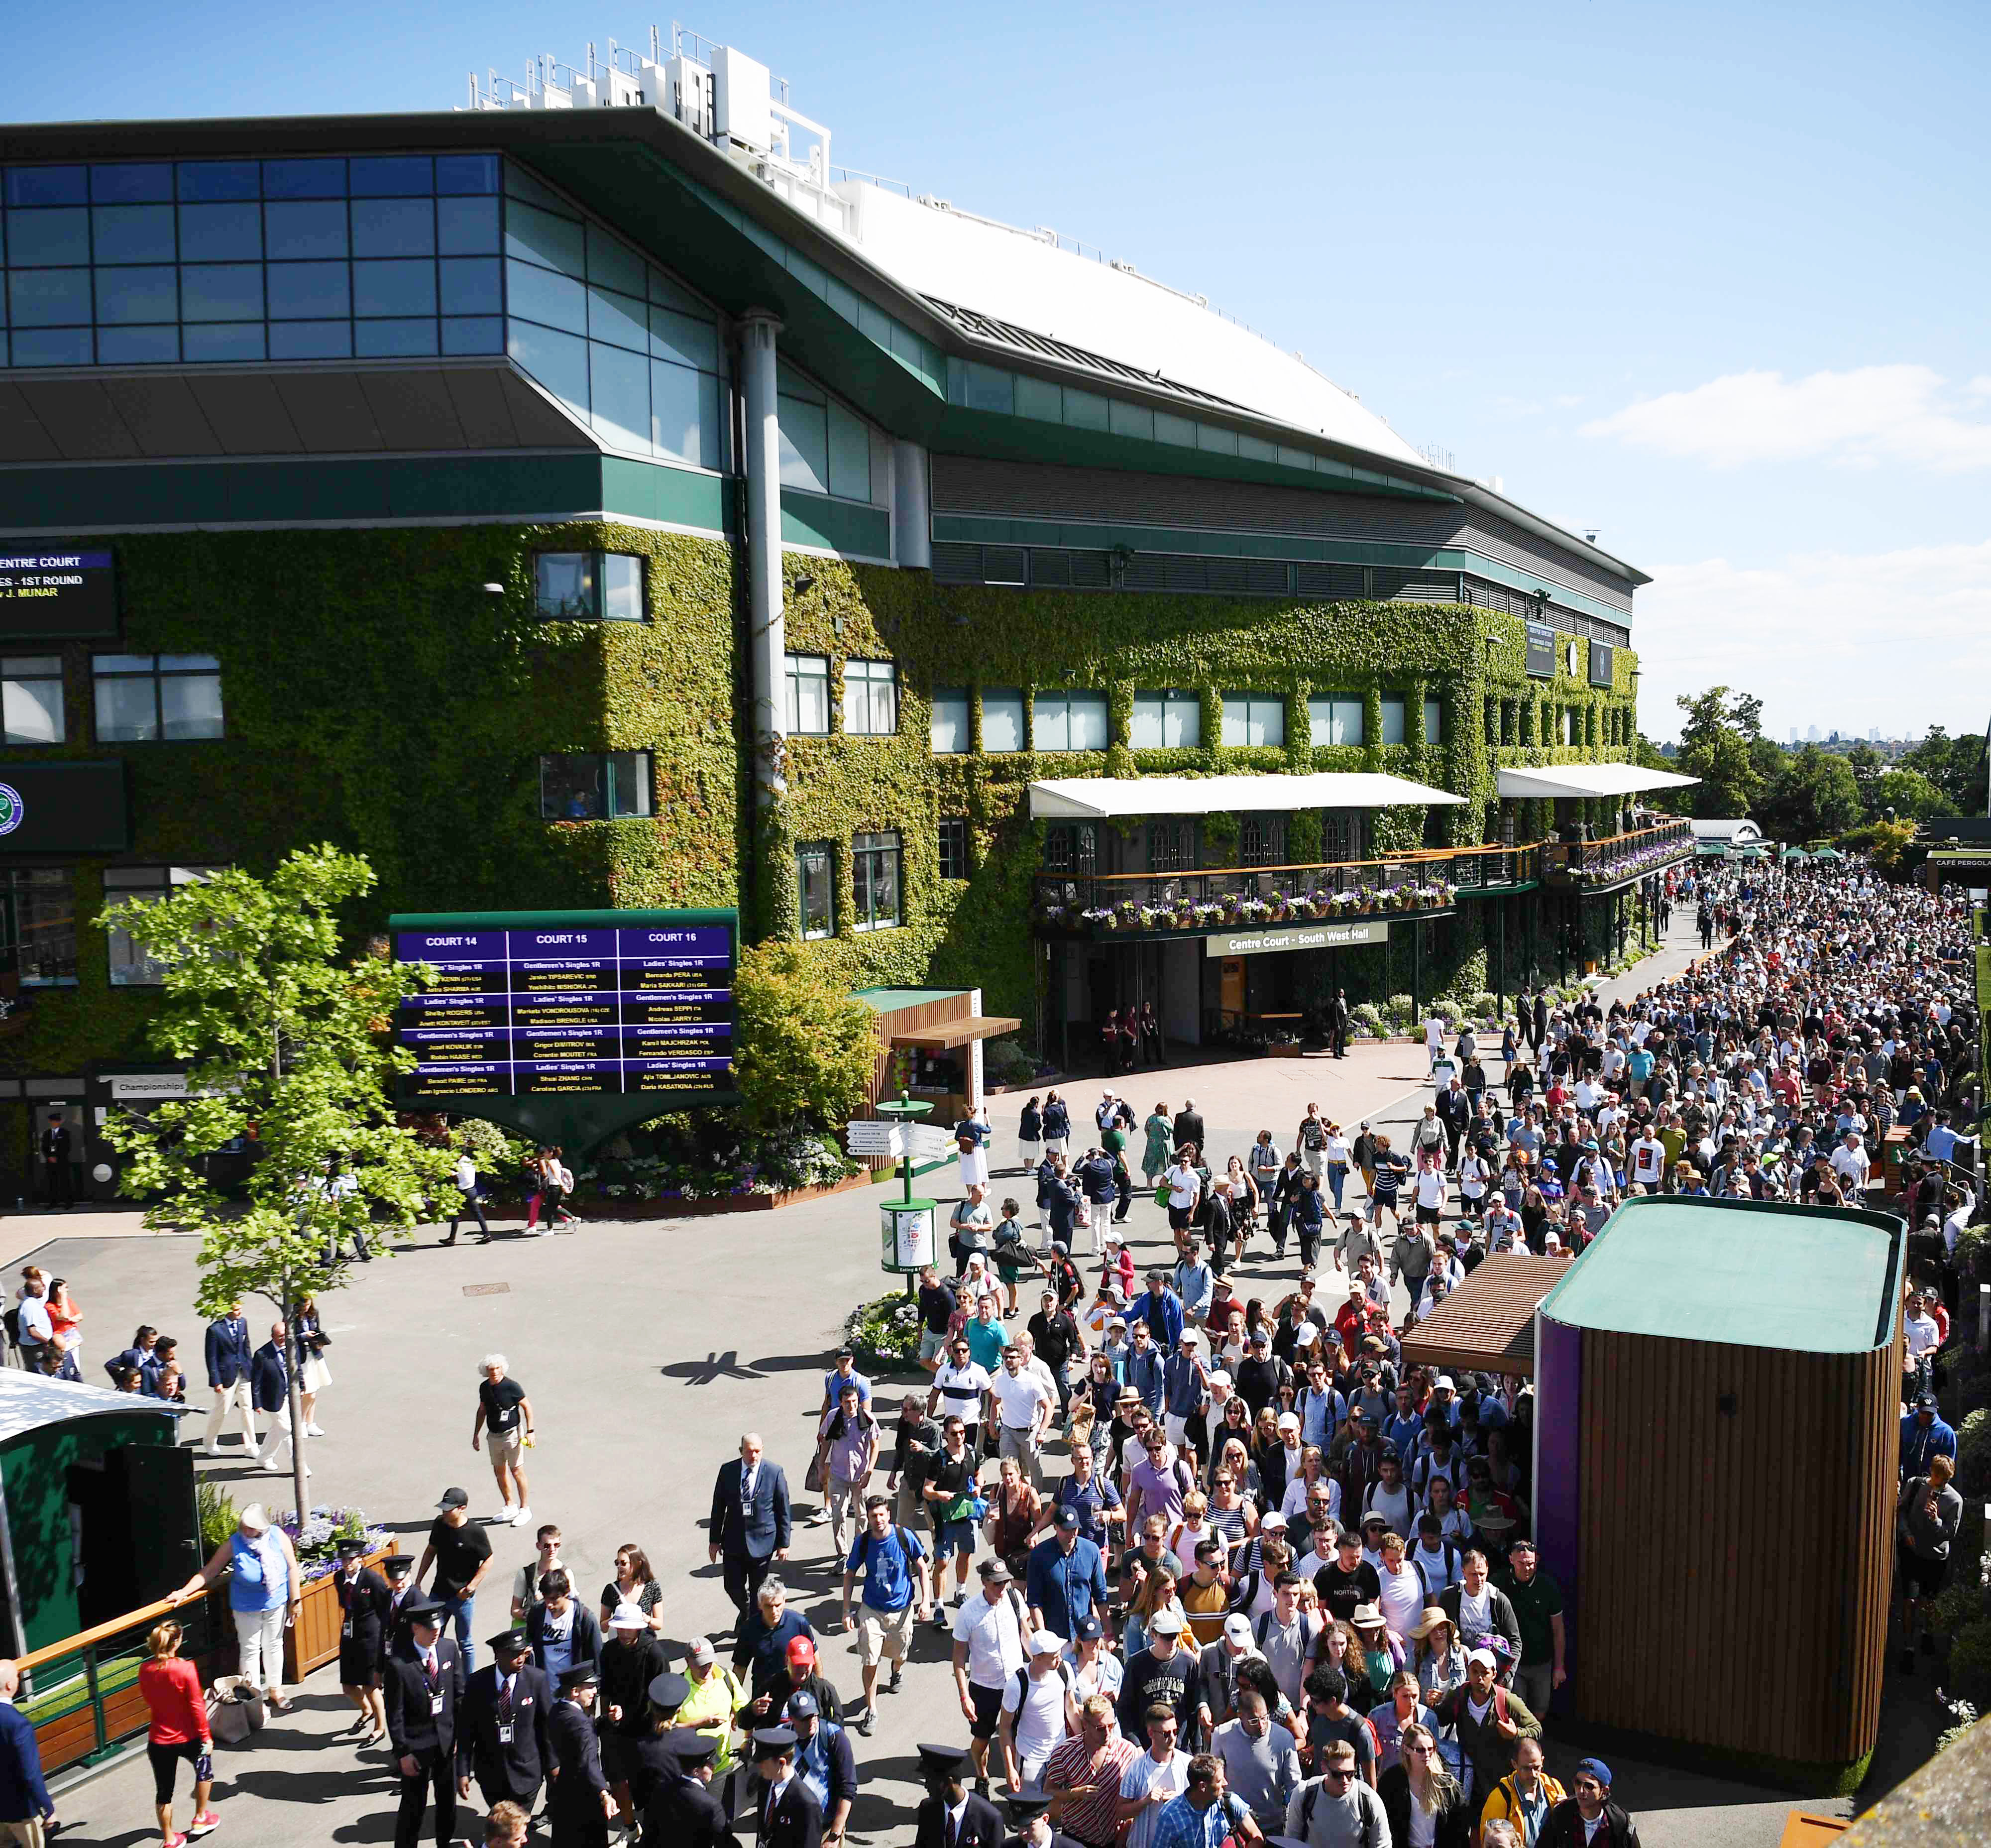 (FILES) In this file photo taken on July 01, 2019 Spectators enter The All England Tennis Club in Wimbledon, southwest London, on July 1, 2019, on the first day of the 2019 Wimbledon Championships tennis tournament. - The 2020 Wimbledon Championships has been cancelled for the first time since World War II due to the coronavirus pandemic, the organisers said in a statement on April 1, 2020, as the virus wreaks further havoc on the global sporting calendar. (Photo by Daniel LEAL-OLIVAS / AFP) / RESTRICTED TO EDITORIAL USE